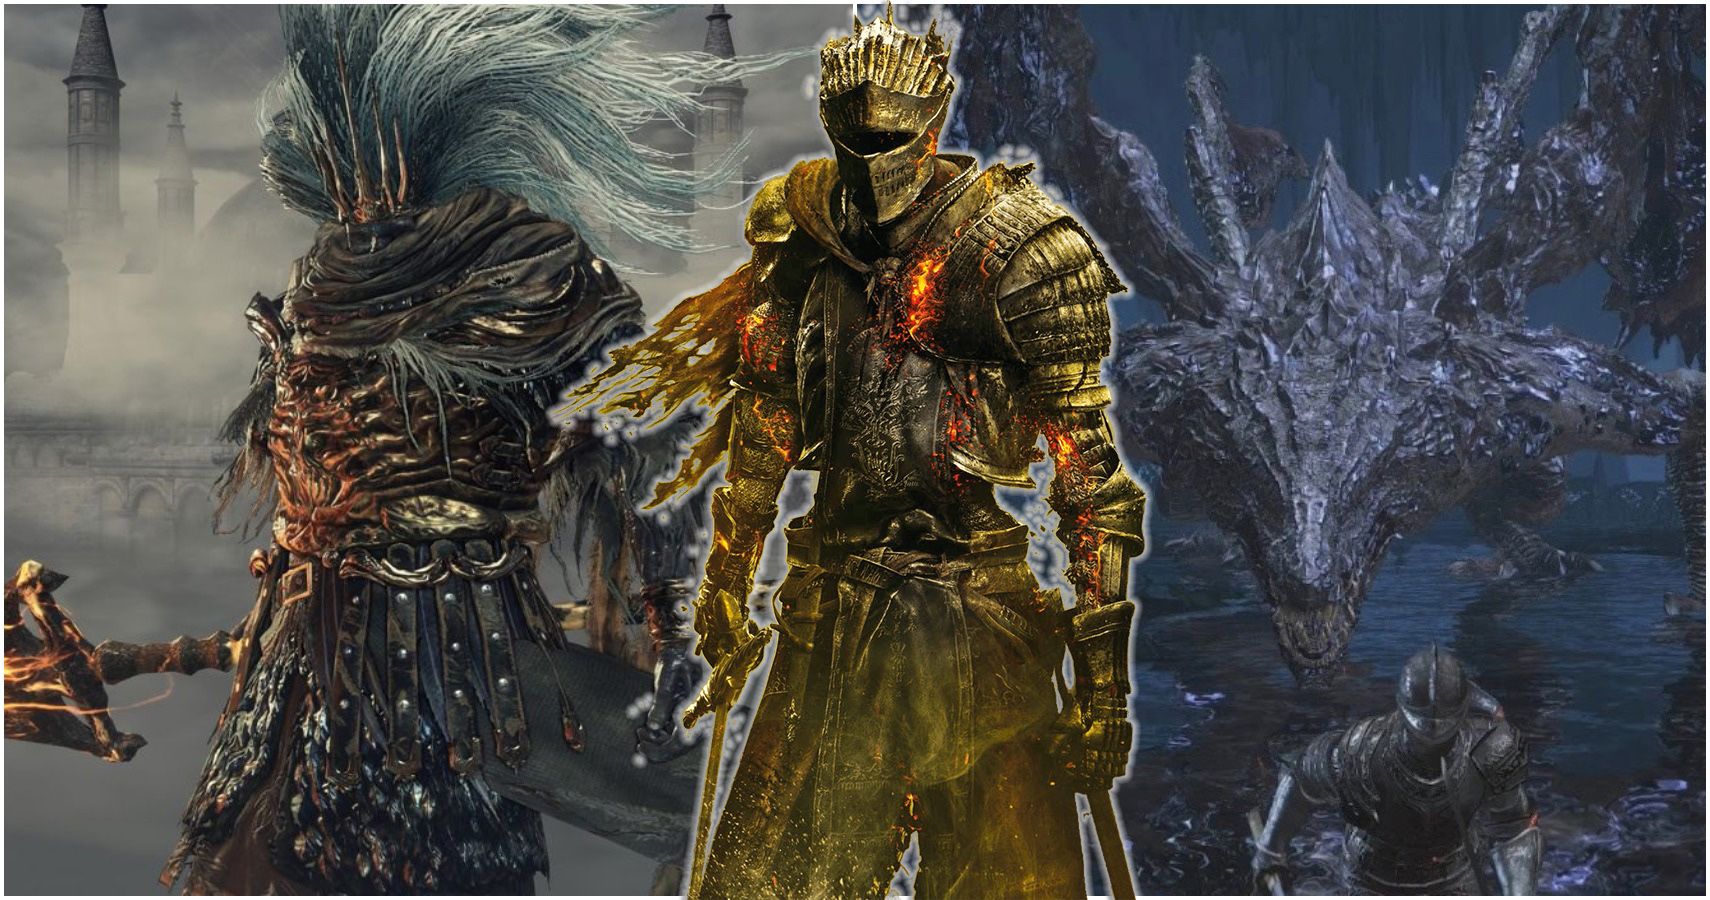 Dark Souls 2: Every DLC Boss Ranked By How Difficult They Are To Beat